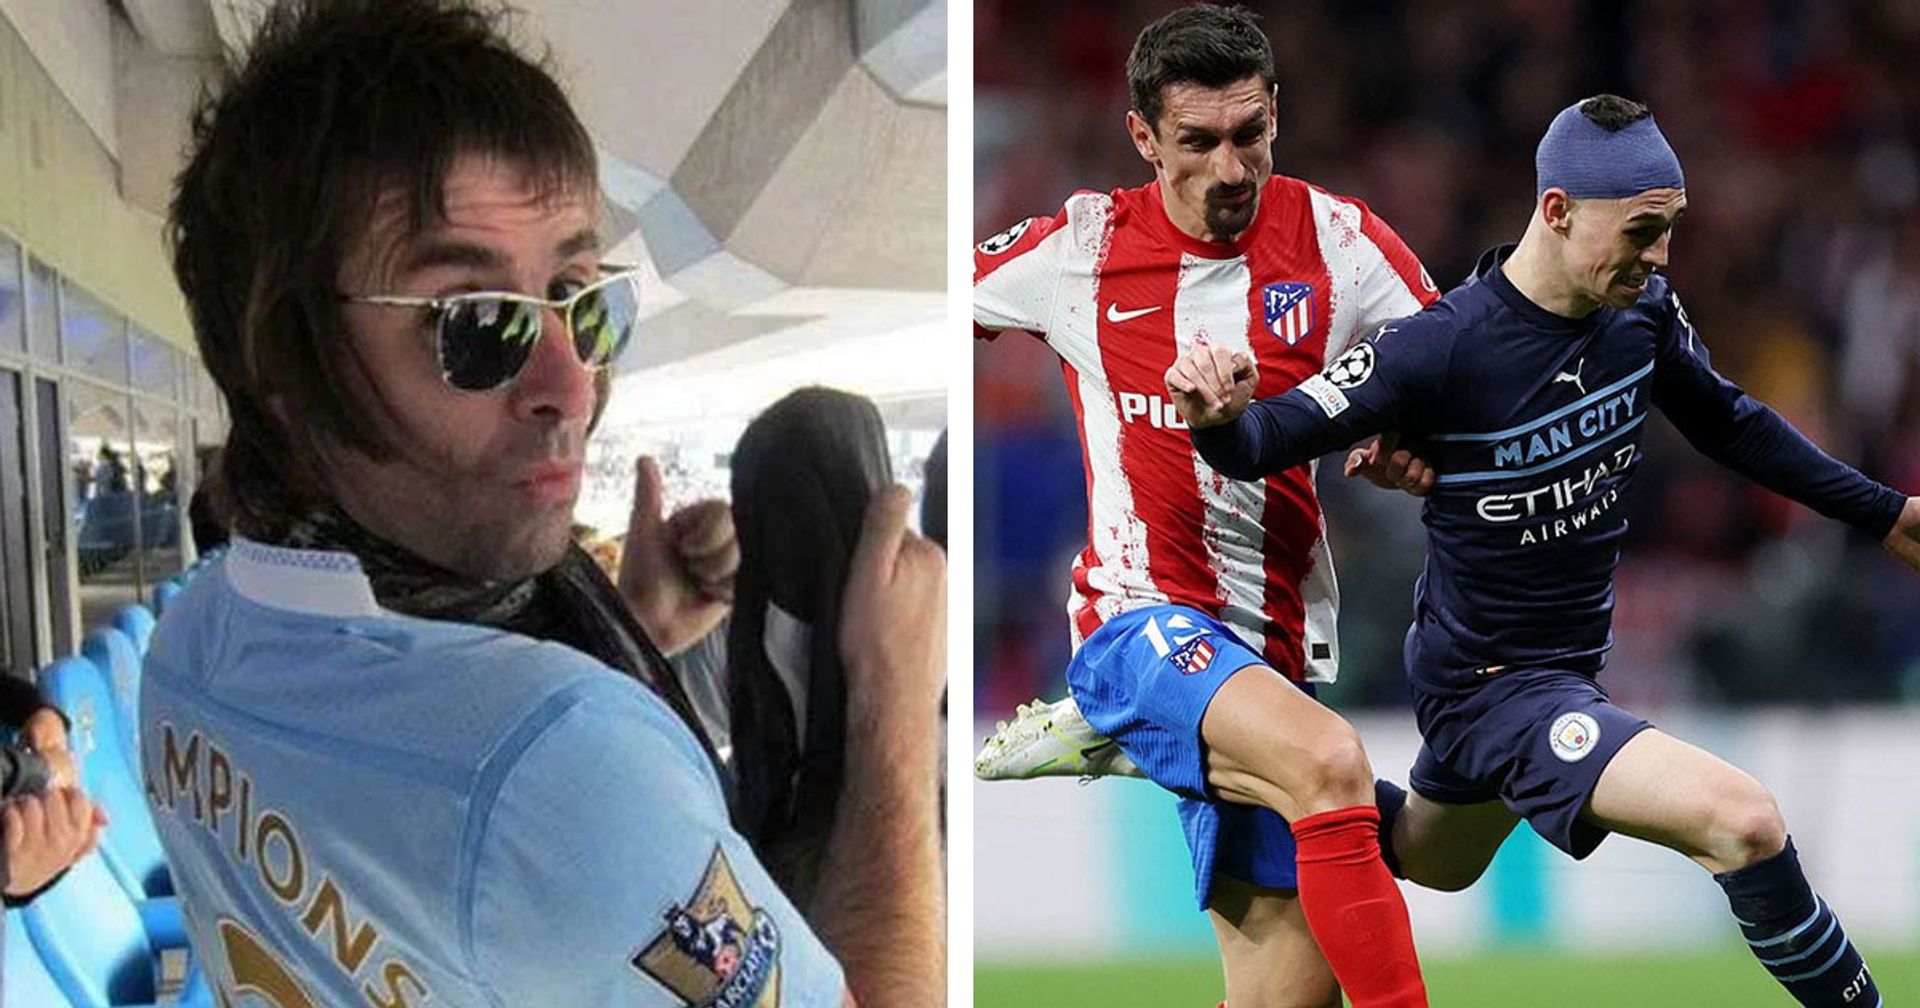 Manchester City's third kit for 2020/21 season leaked and superfan Liam  Gallagher hates it